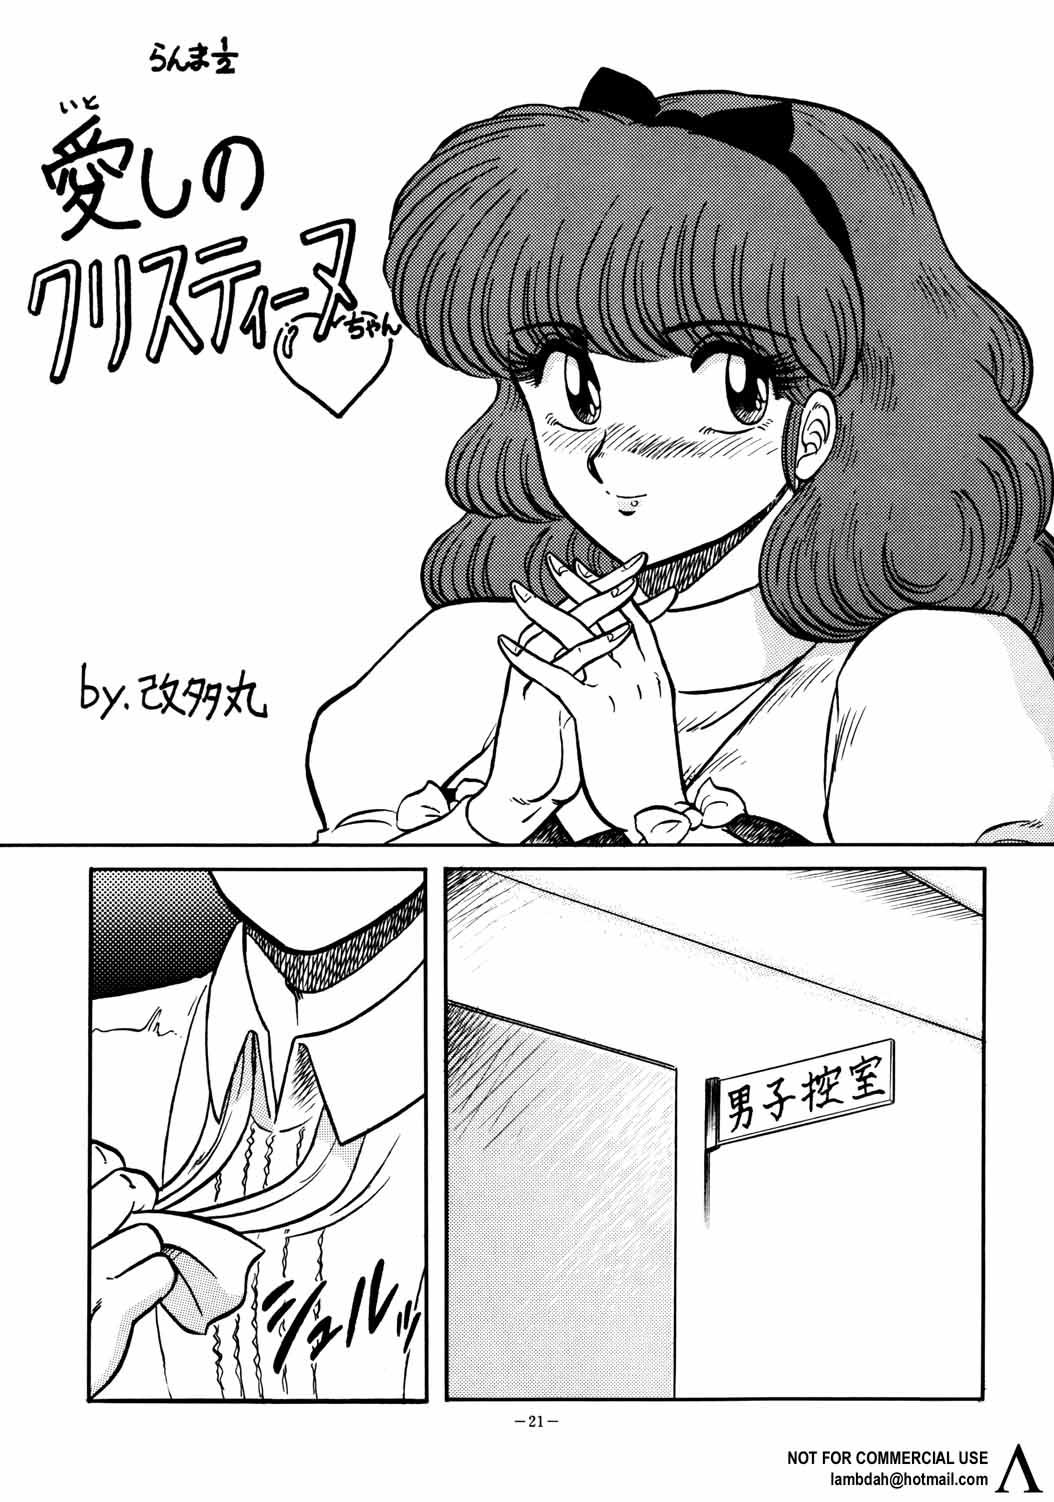 Rough Sex Look Out 26 - Sailor moon Ranma 12 Video girl ai Rimjob - Page 9